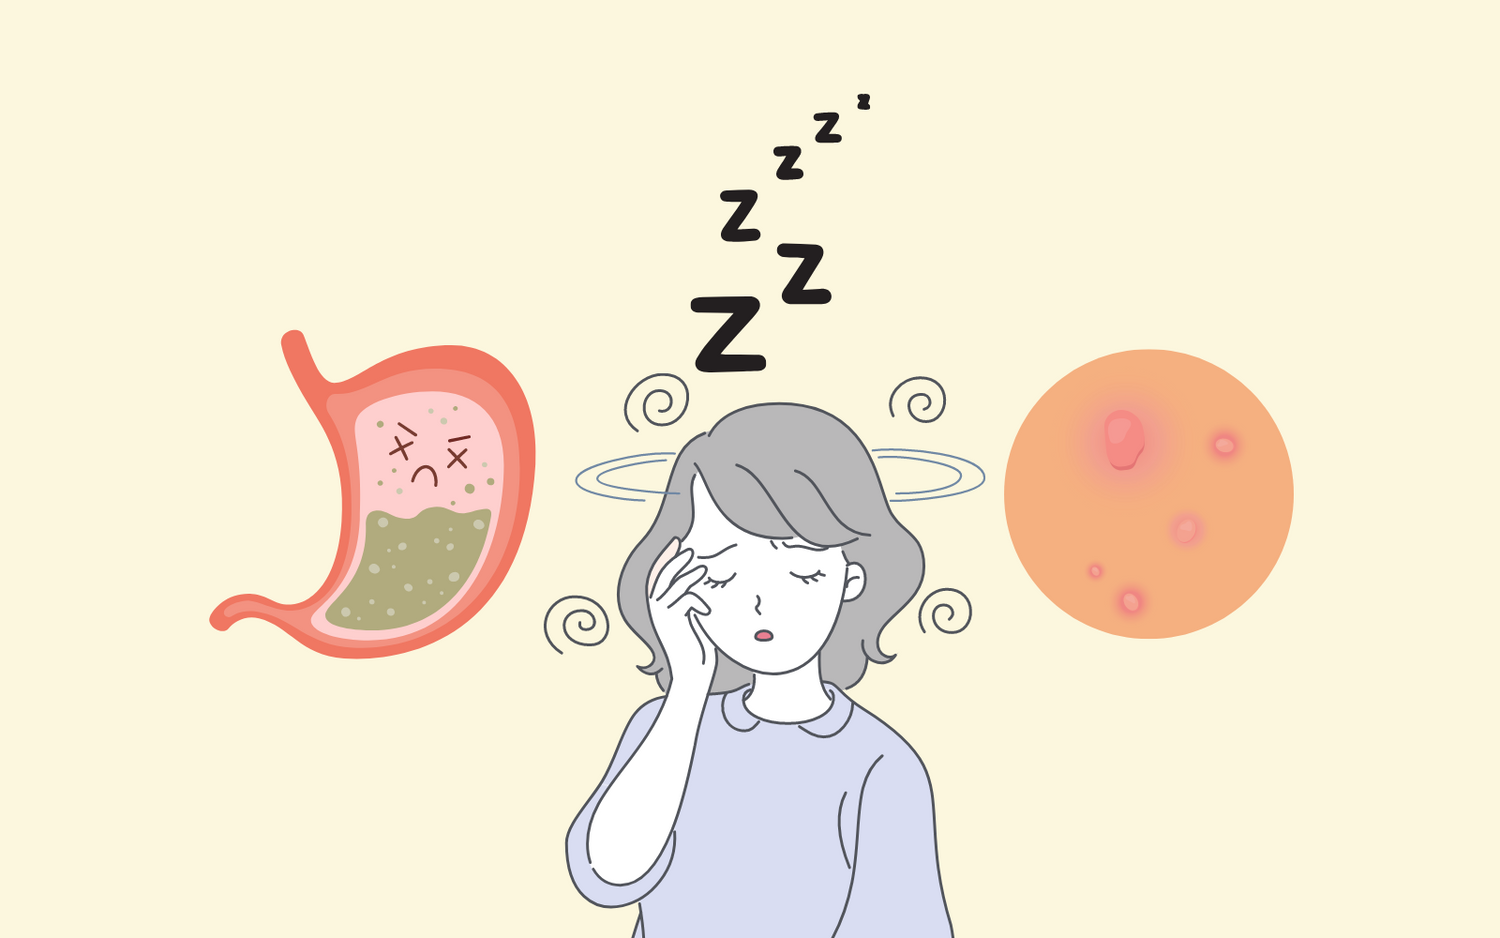 Graphic of someone with bad gut health experiencing the following symptoms: stomach issues, poor sleep, and acne.